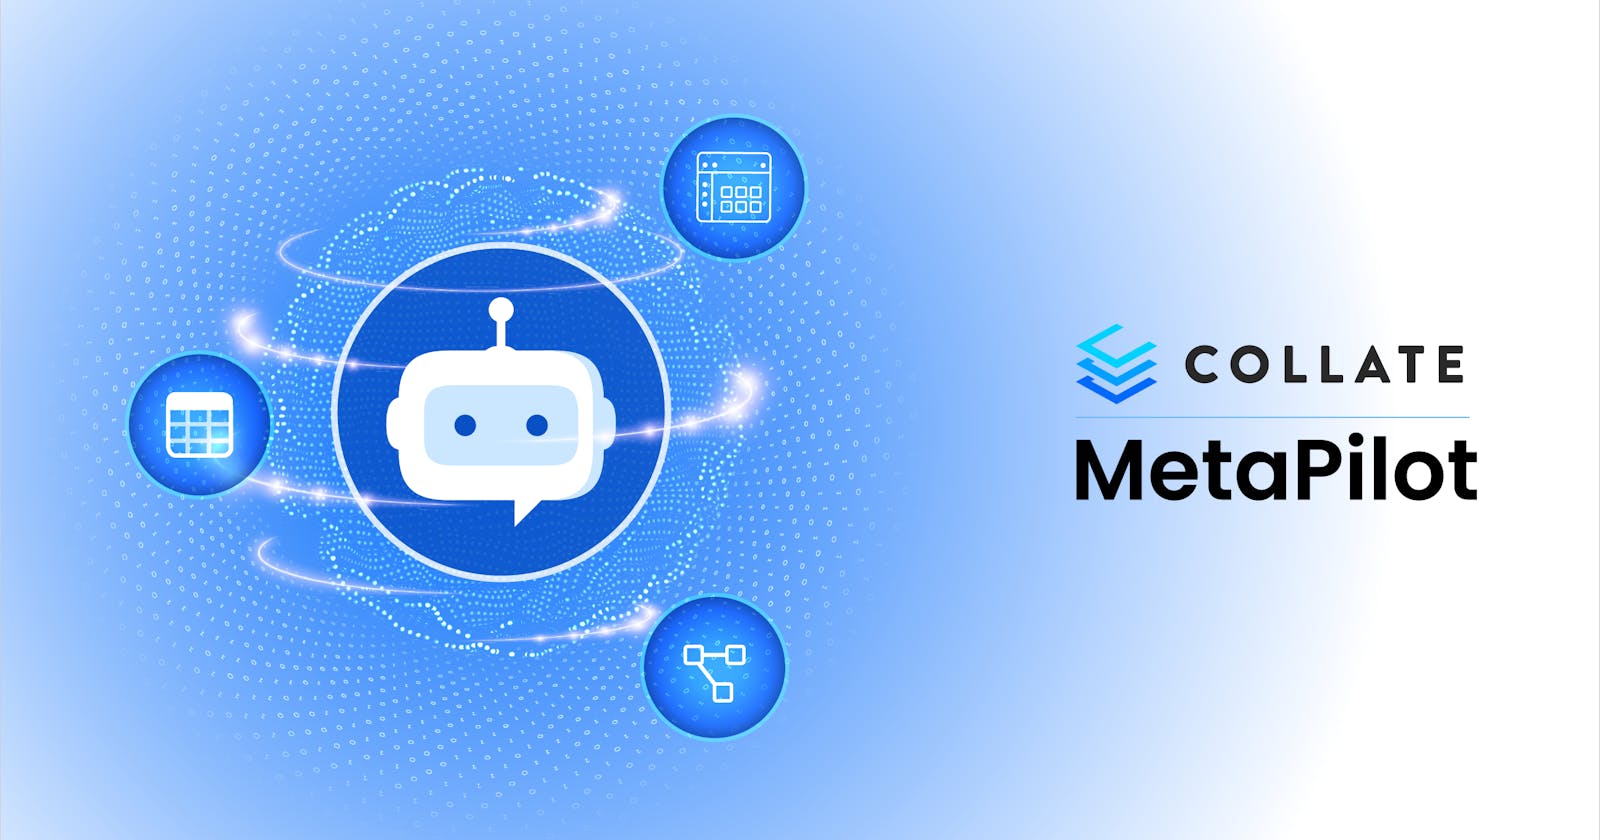 Cover Image for Introducing Collate MetaPilot: Generative AI for Your Metadata